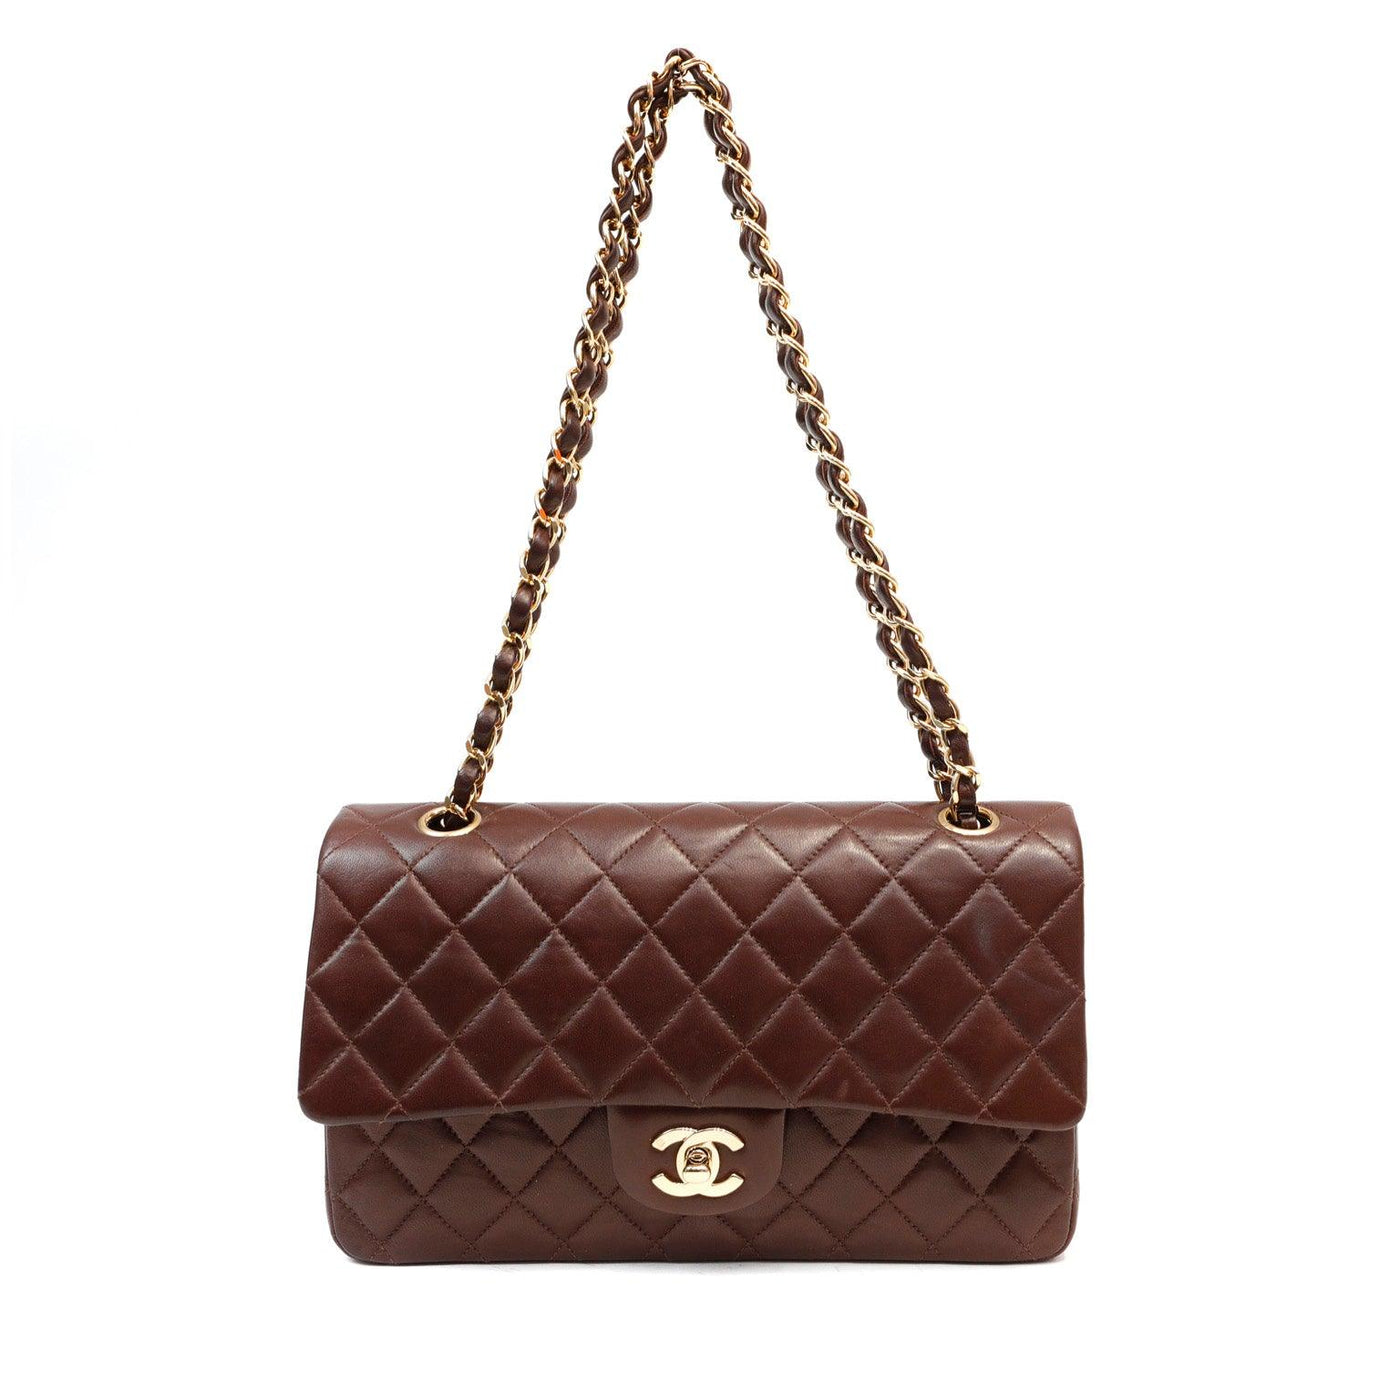 Chanel Brown Lambskin Medium Classic Double Flap Bag - Only Authentics